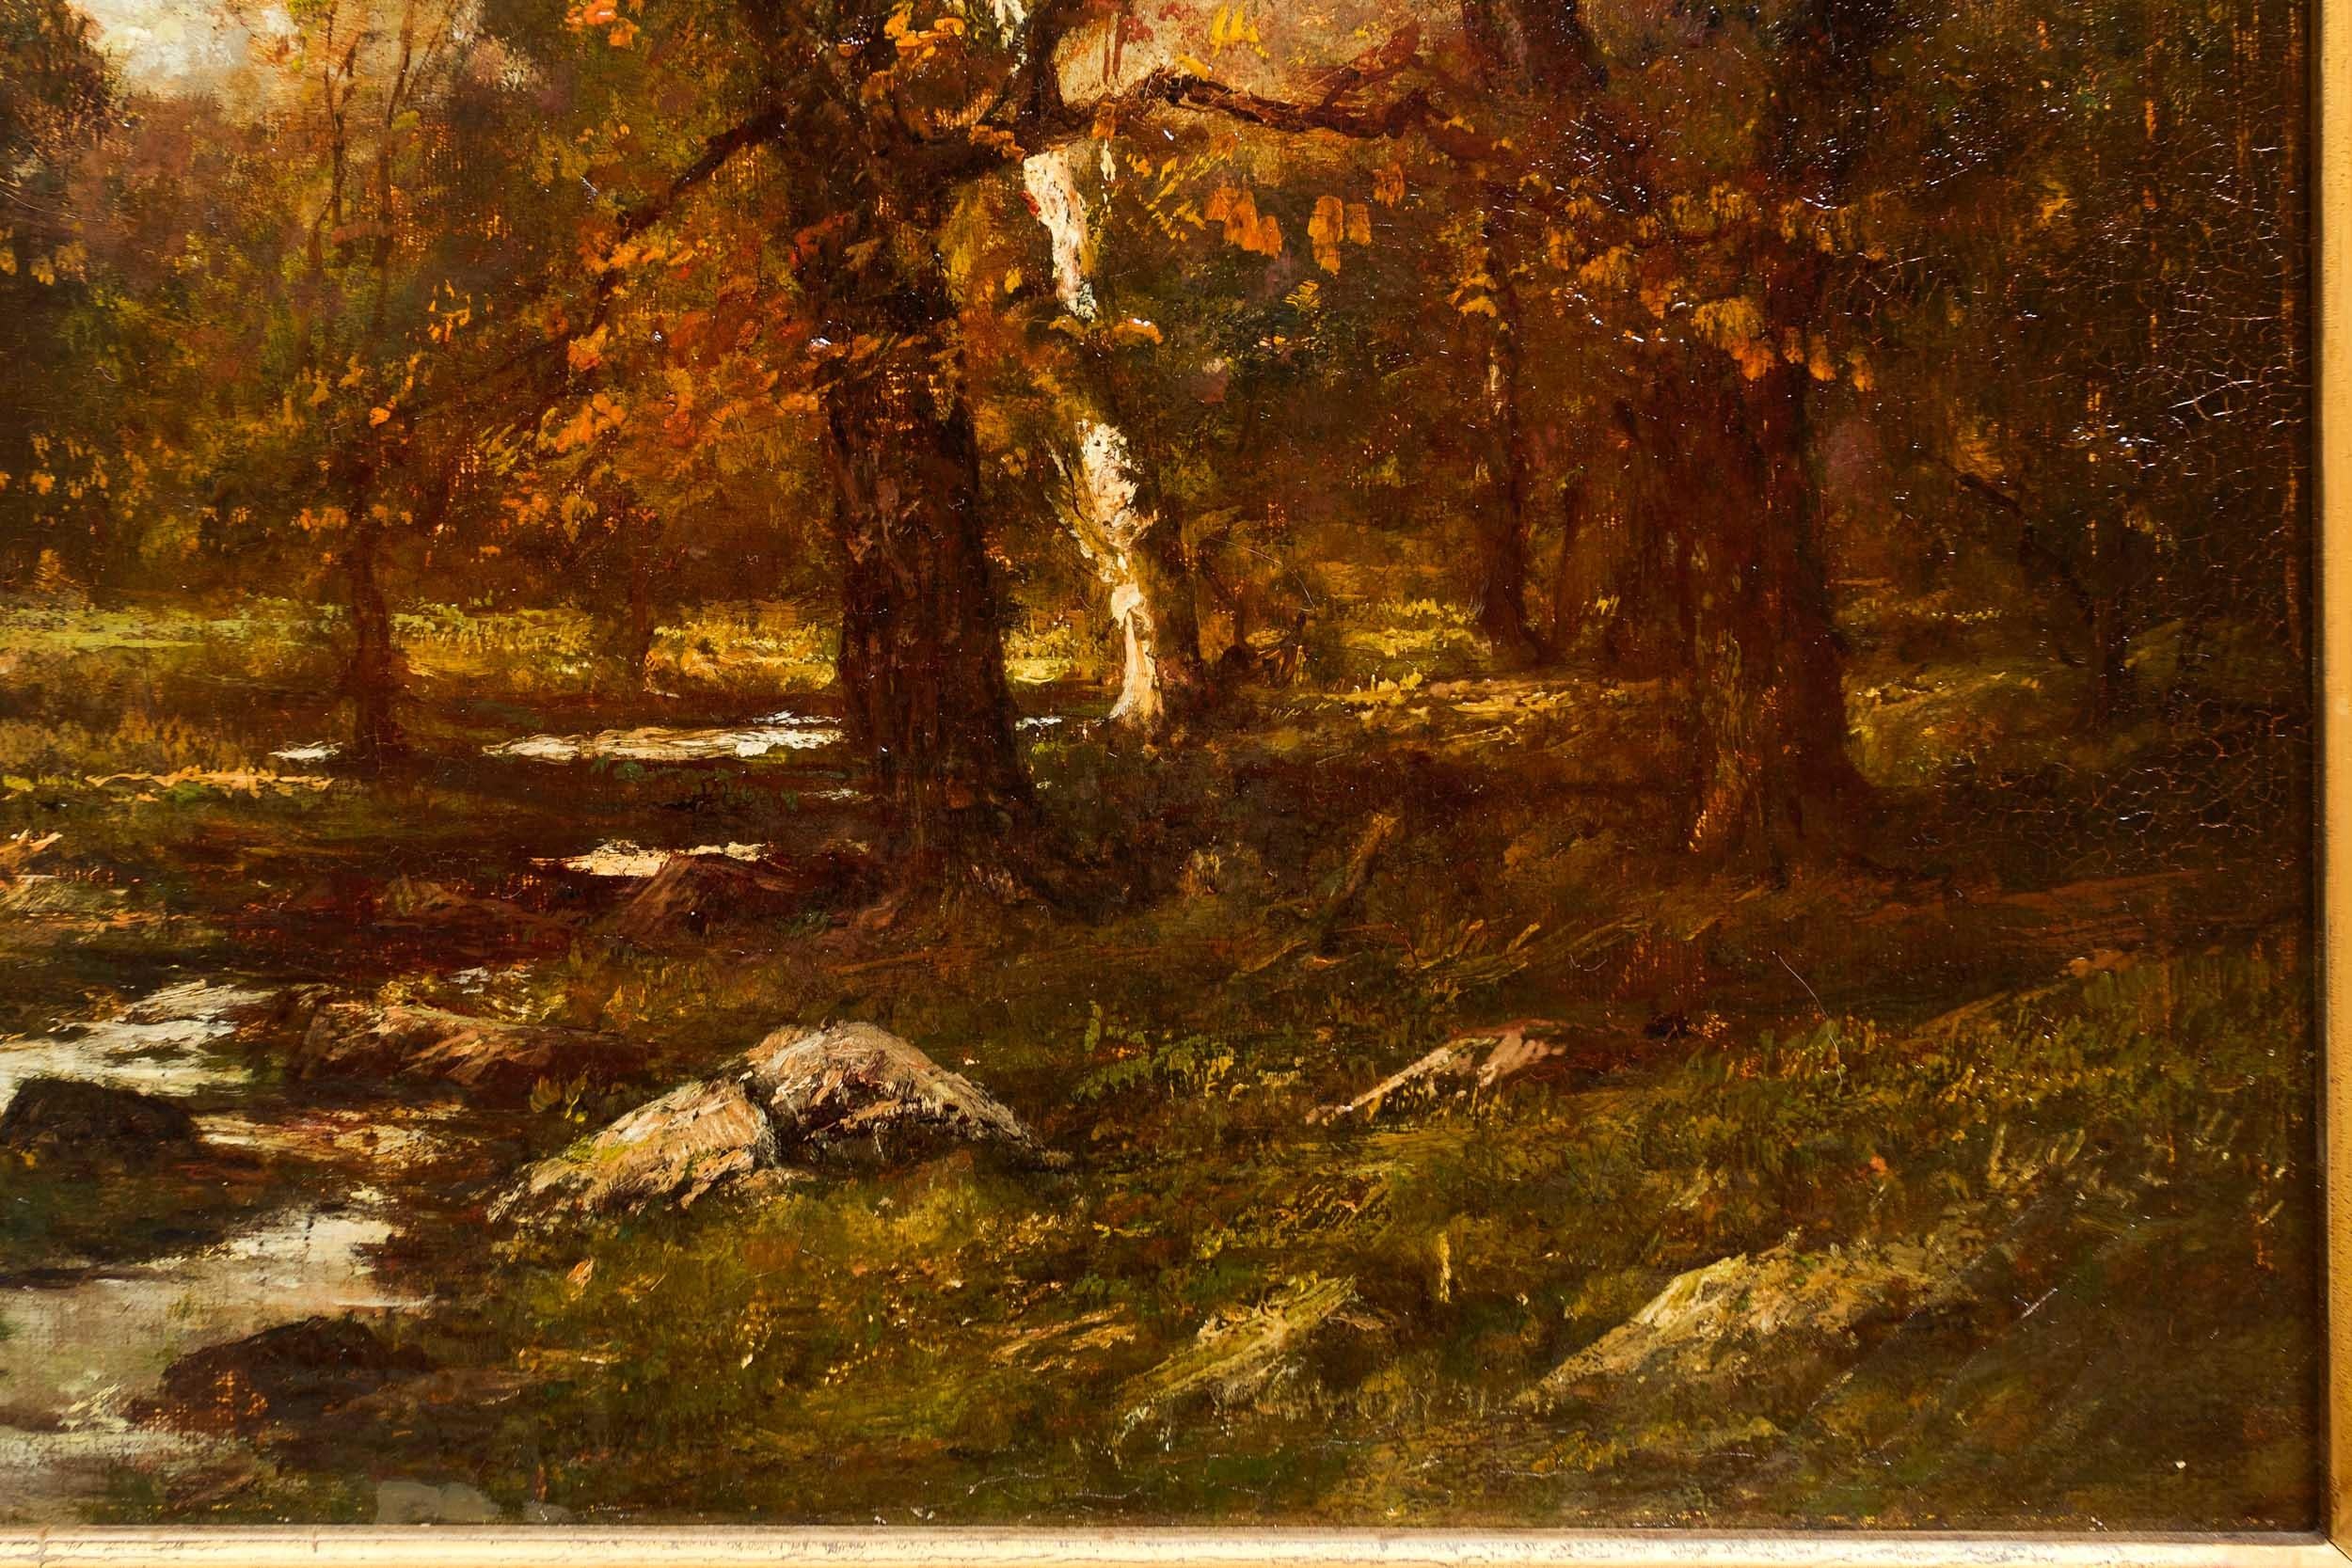 19th Century American Barbizon Painting with Autumn Landscape of Birches by Charles Linford